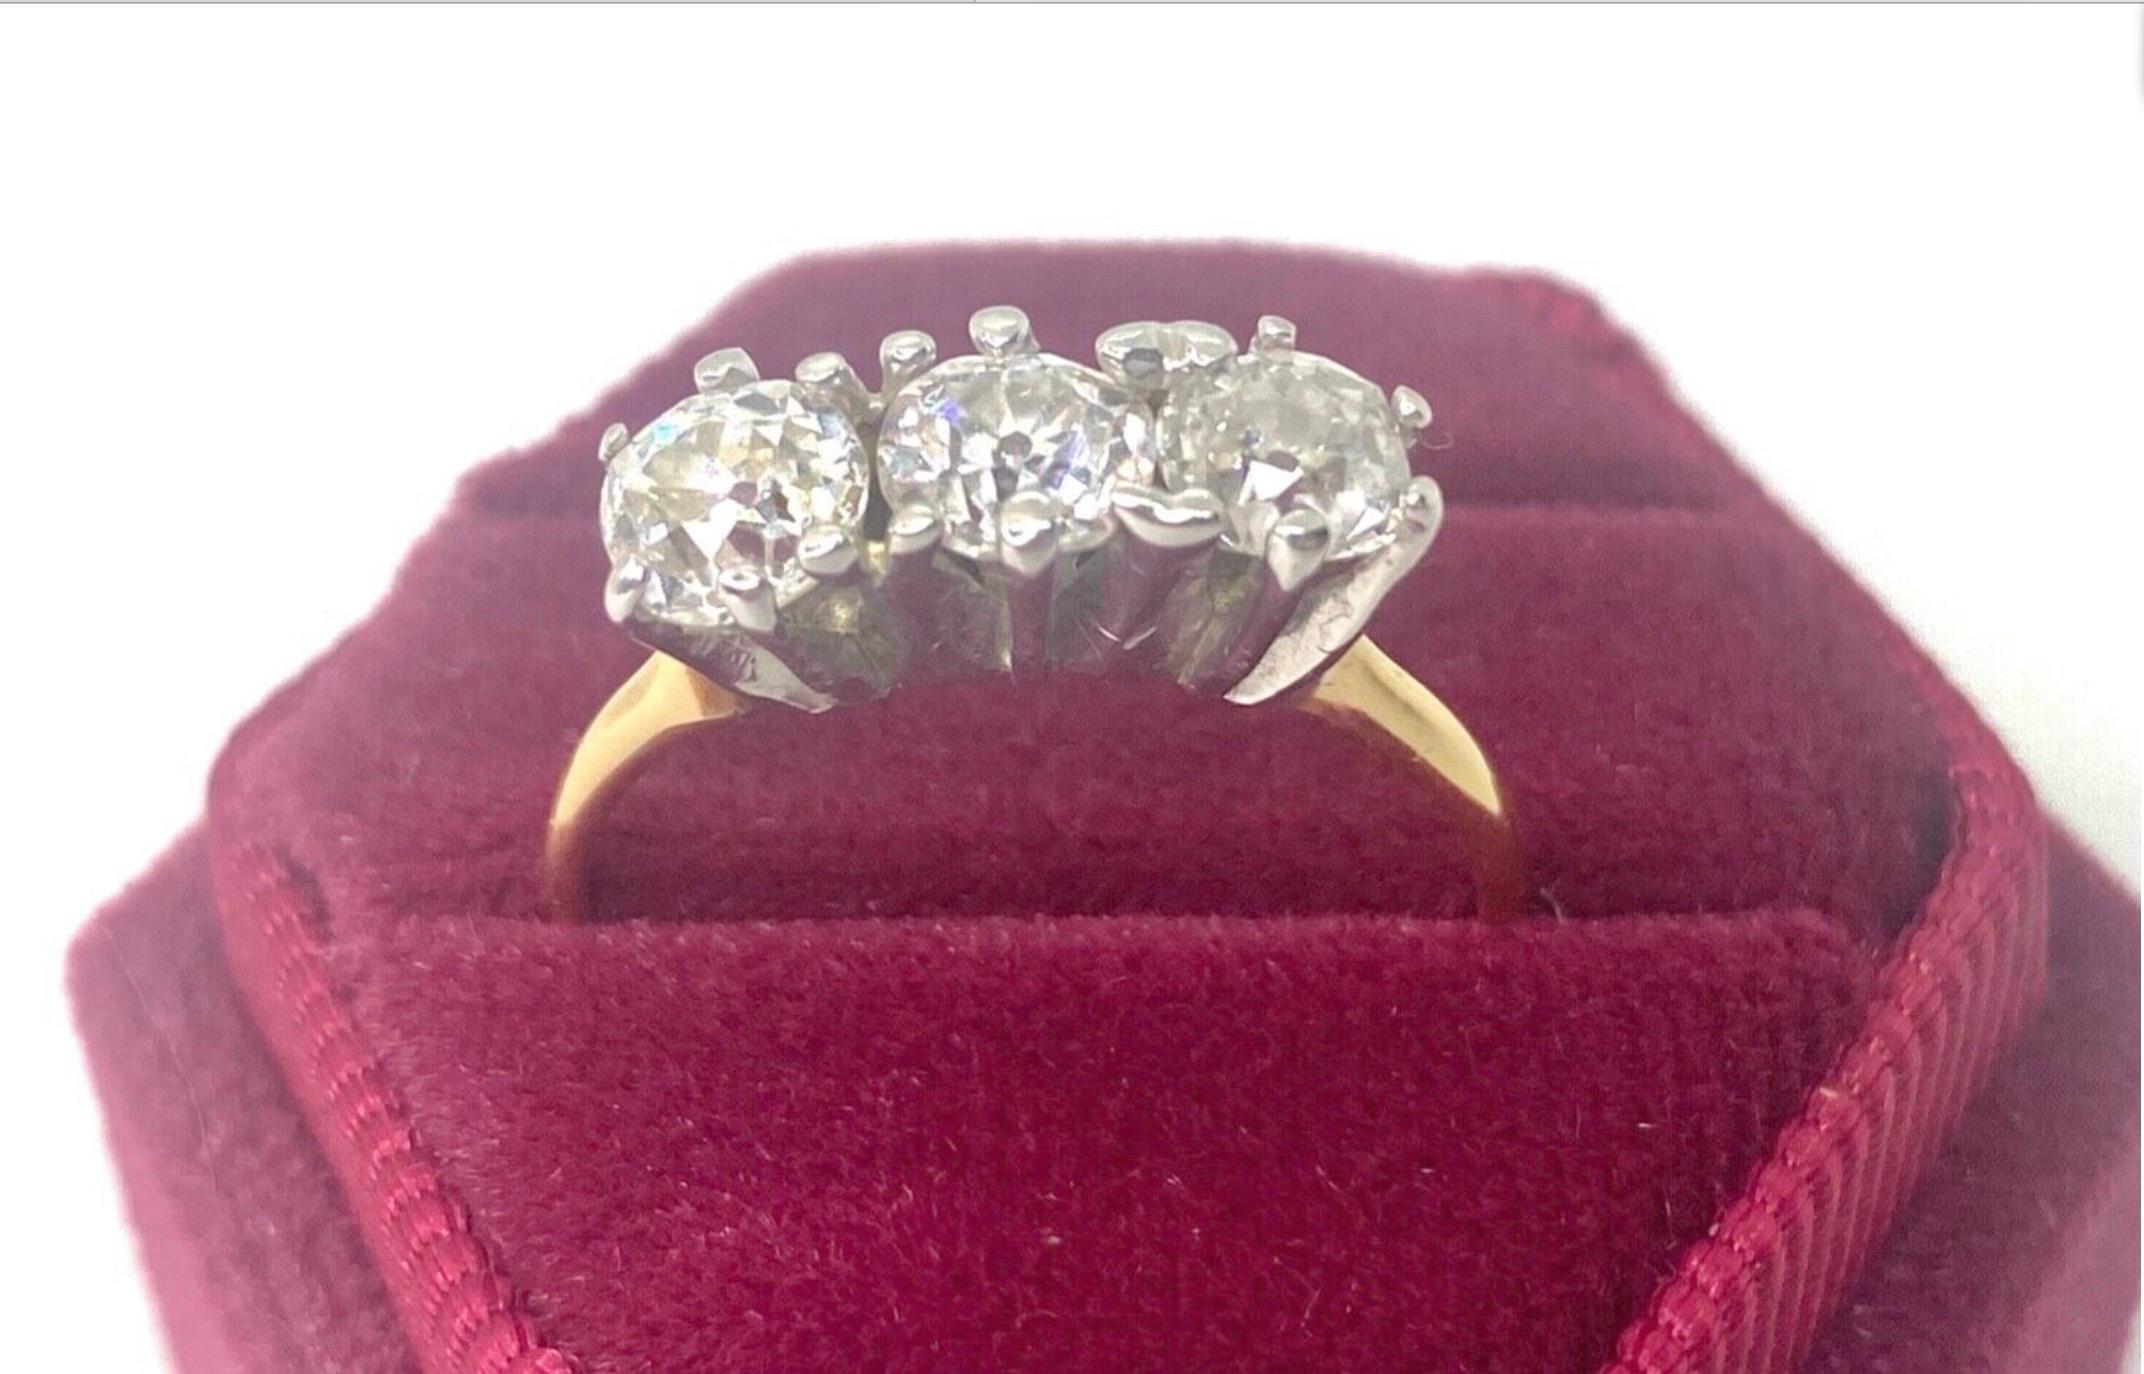 This lovely vintage three-stone diamond engagement ring features three round brilliant cut diamonds H/SI2, with an approximate total weight of 1.50 carats, all mounted in Edwardian antique claw settings. The beautiful row of diamonds is set atop in